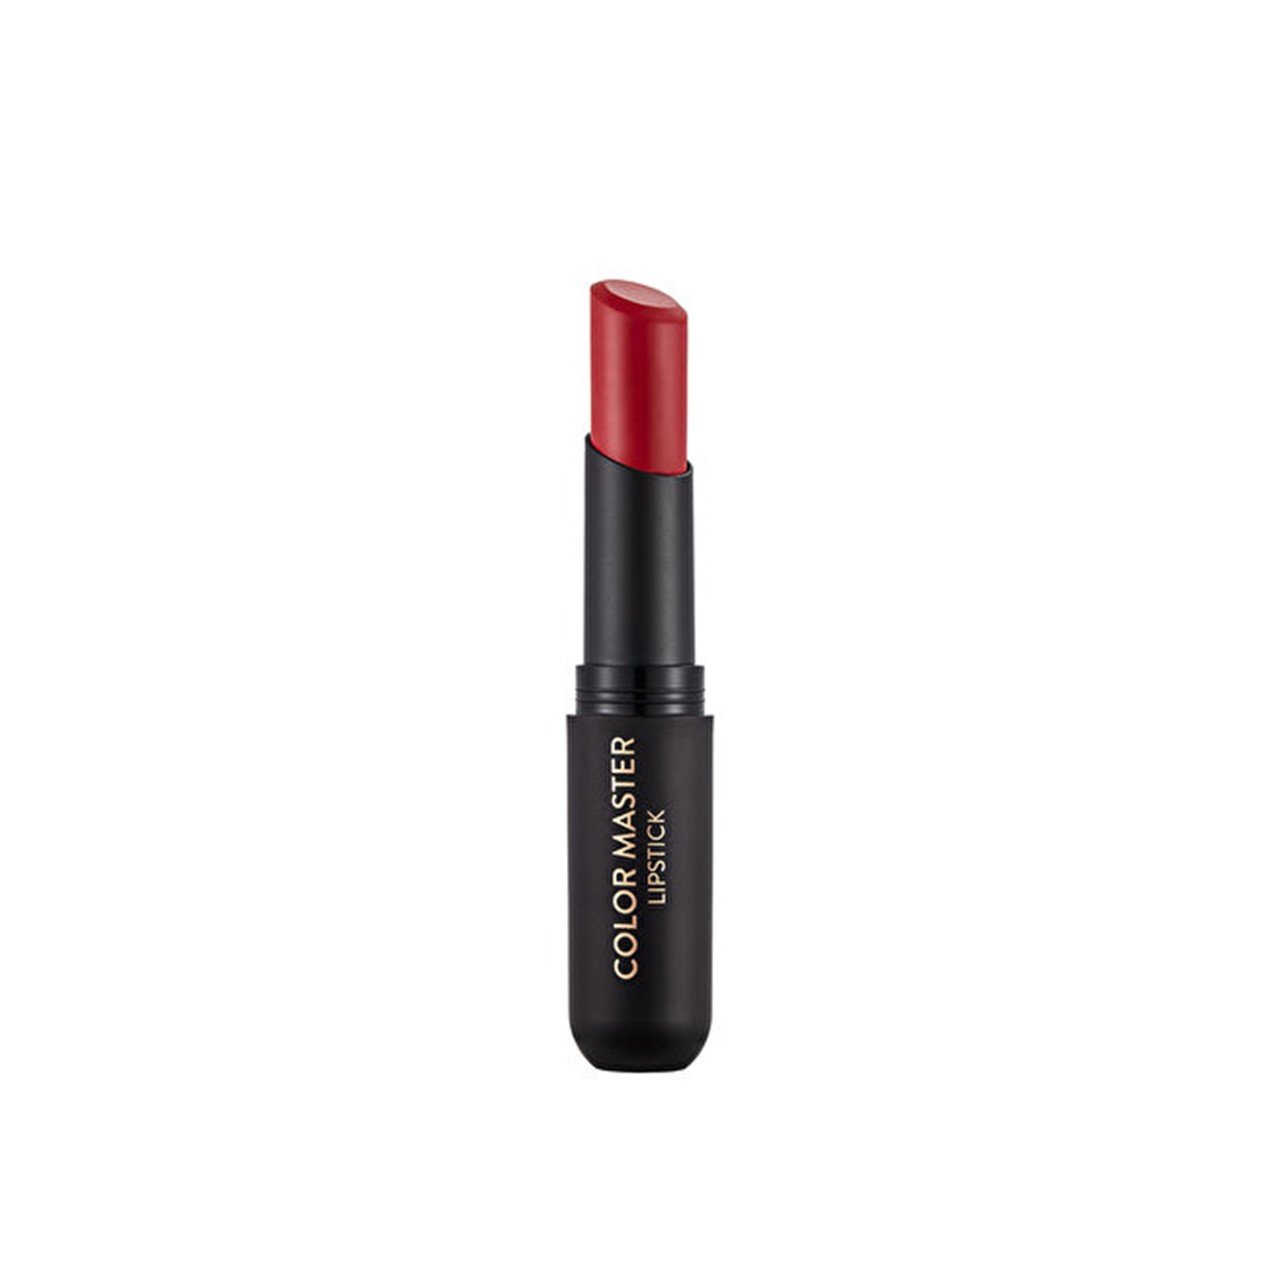 Flormar Color Master Lipstick 14 The Red 3g